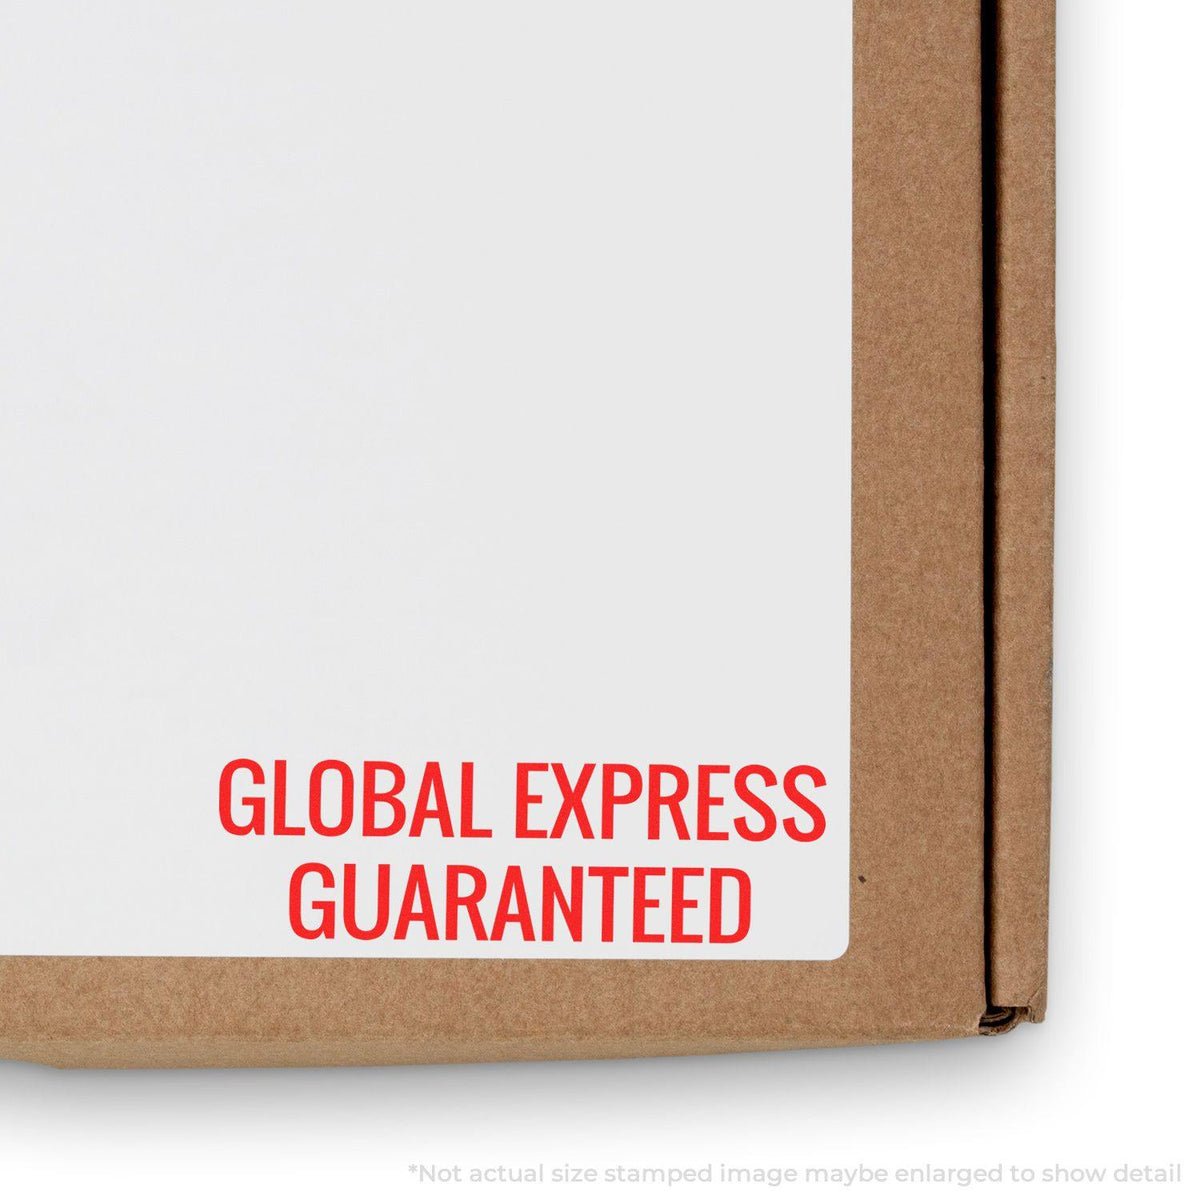 Global Express Guaranteed Rubber Stamp In Use Photo